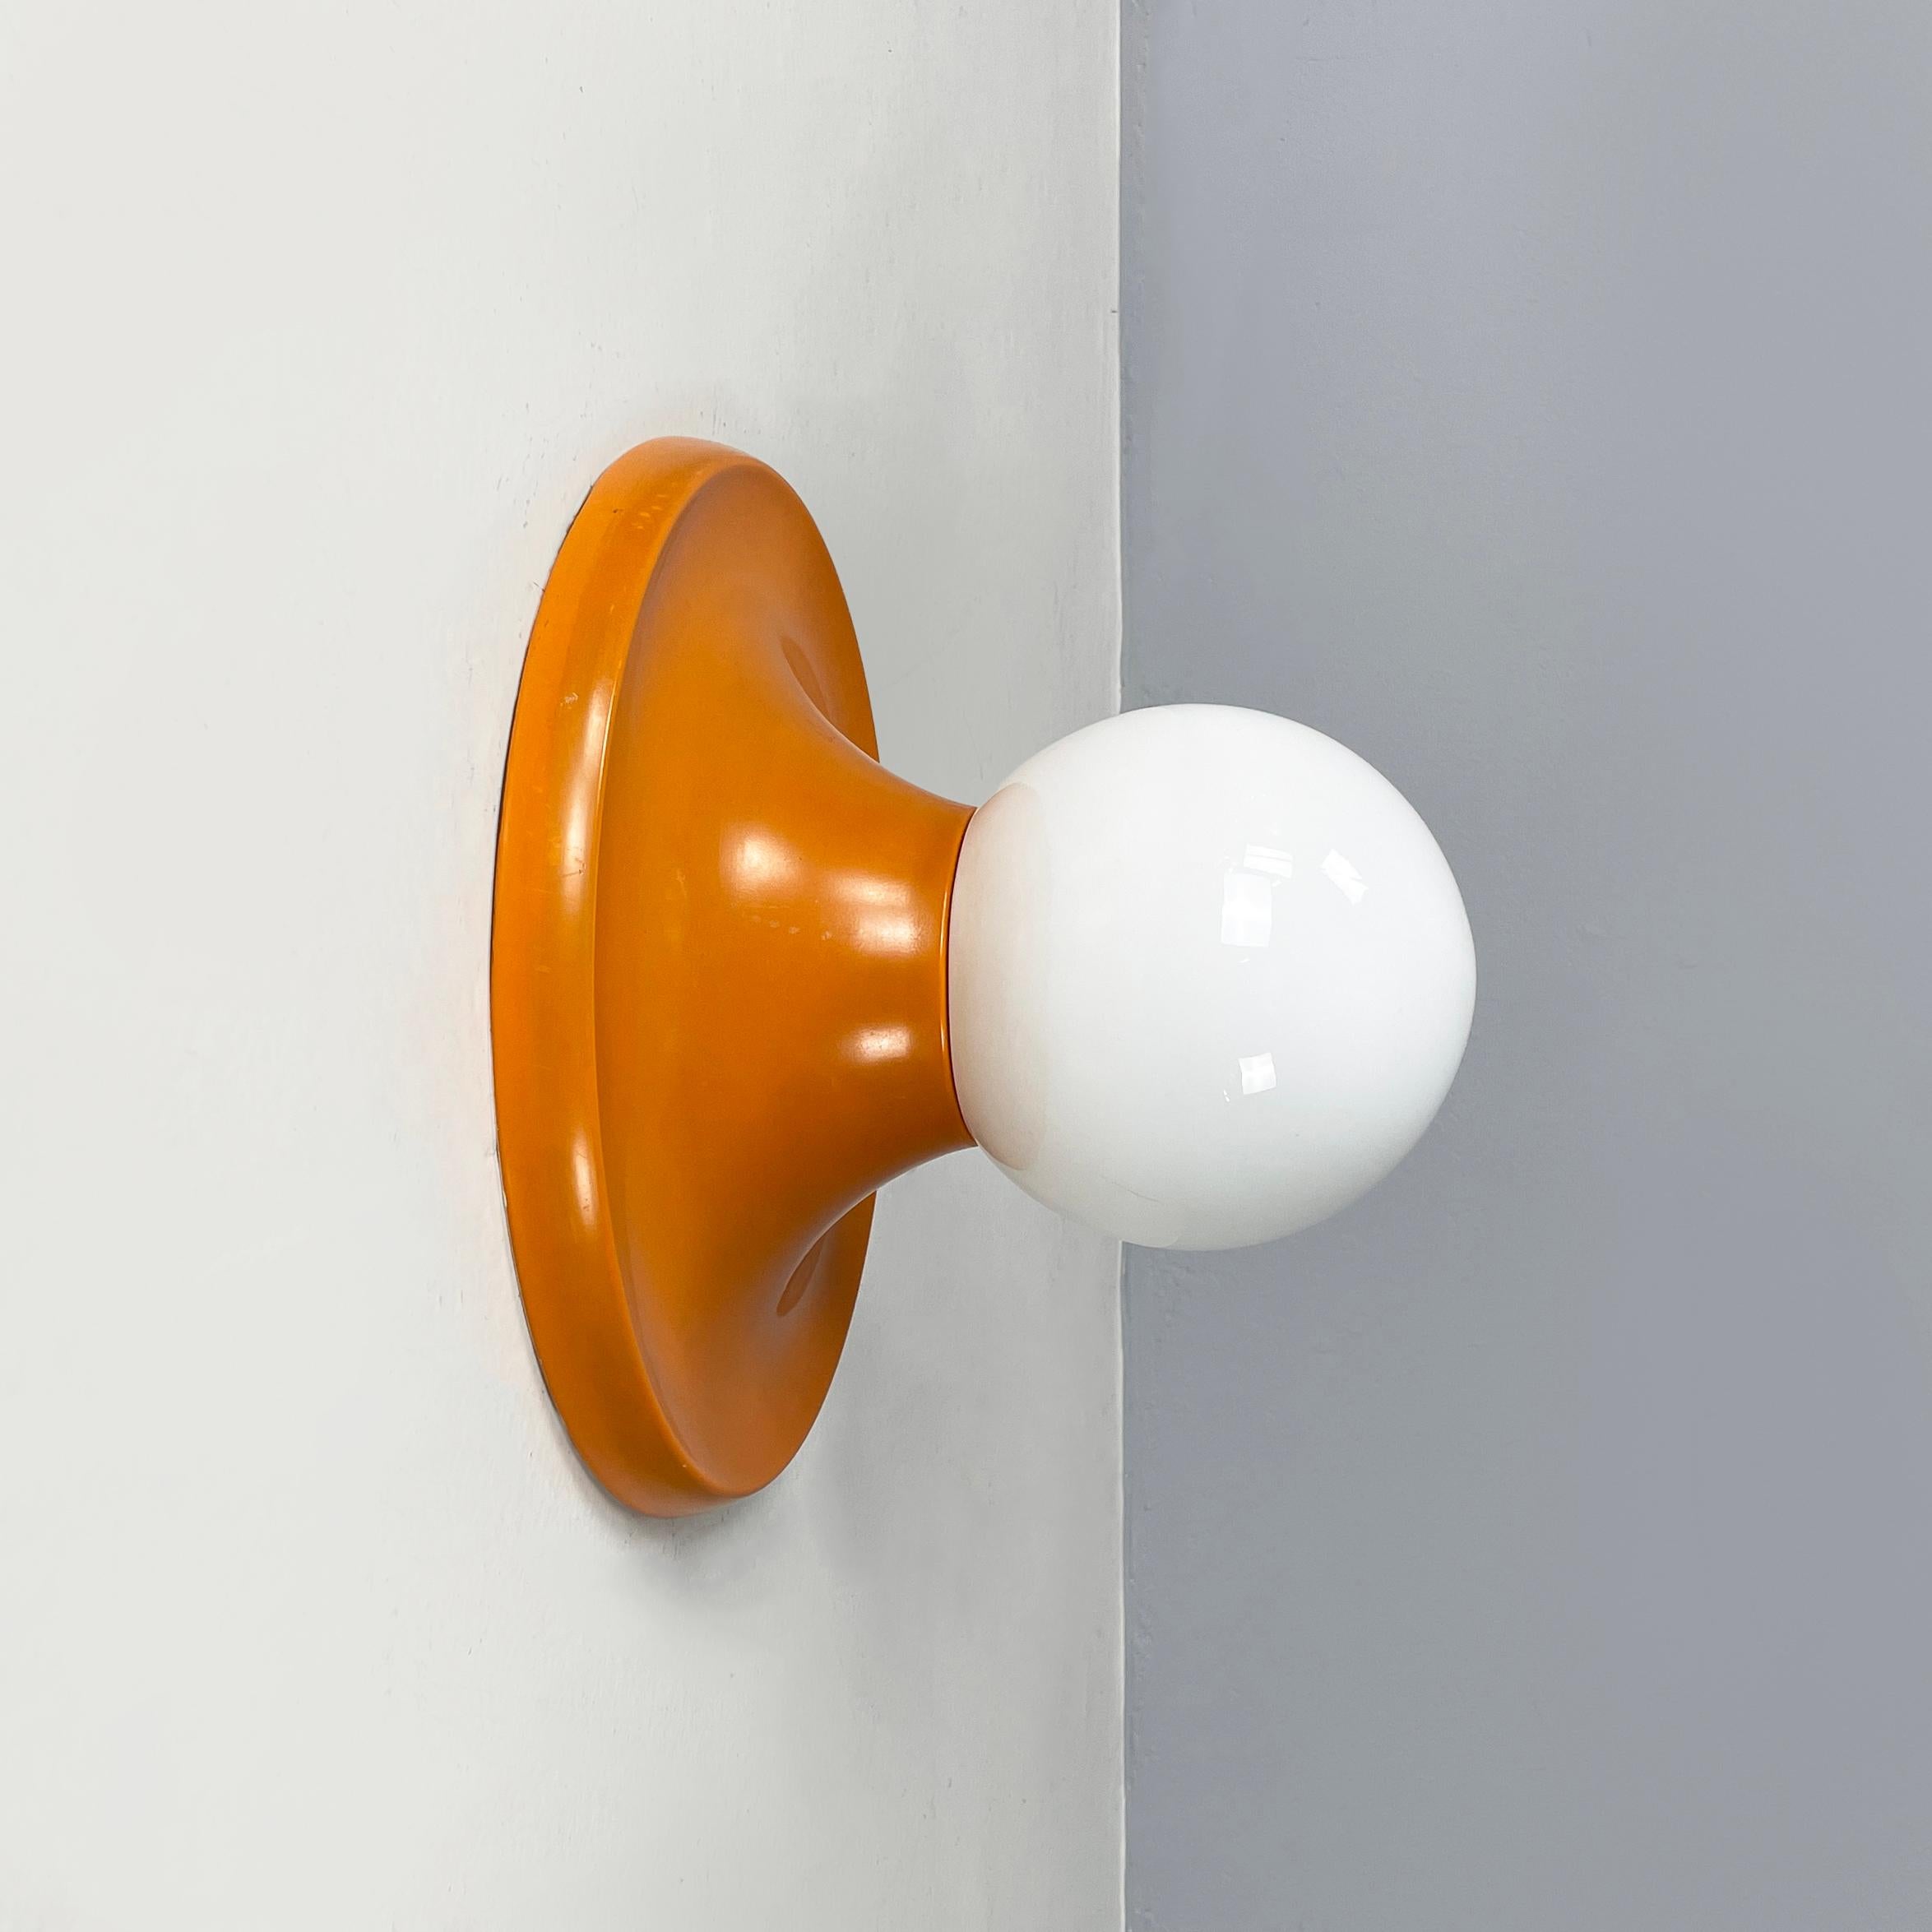 Italian mid-century modern Wall light Light Ball by Castiglioni brothers for Flos 1960s
Elegant wall or ceiling lamp mod. Light Ball with spherical opaline glass diffuser. The round base structure is in orange enamelled metal.
Produced by Flos in